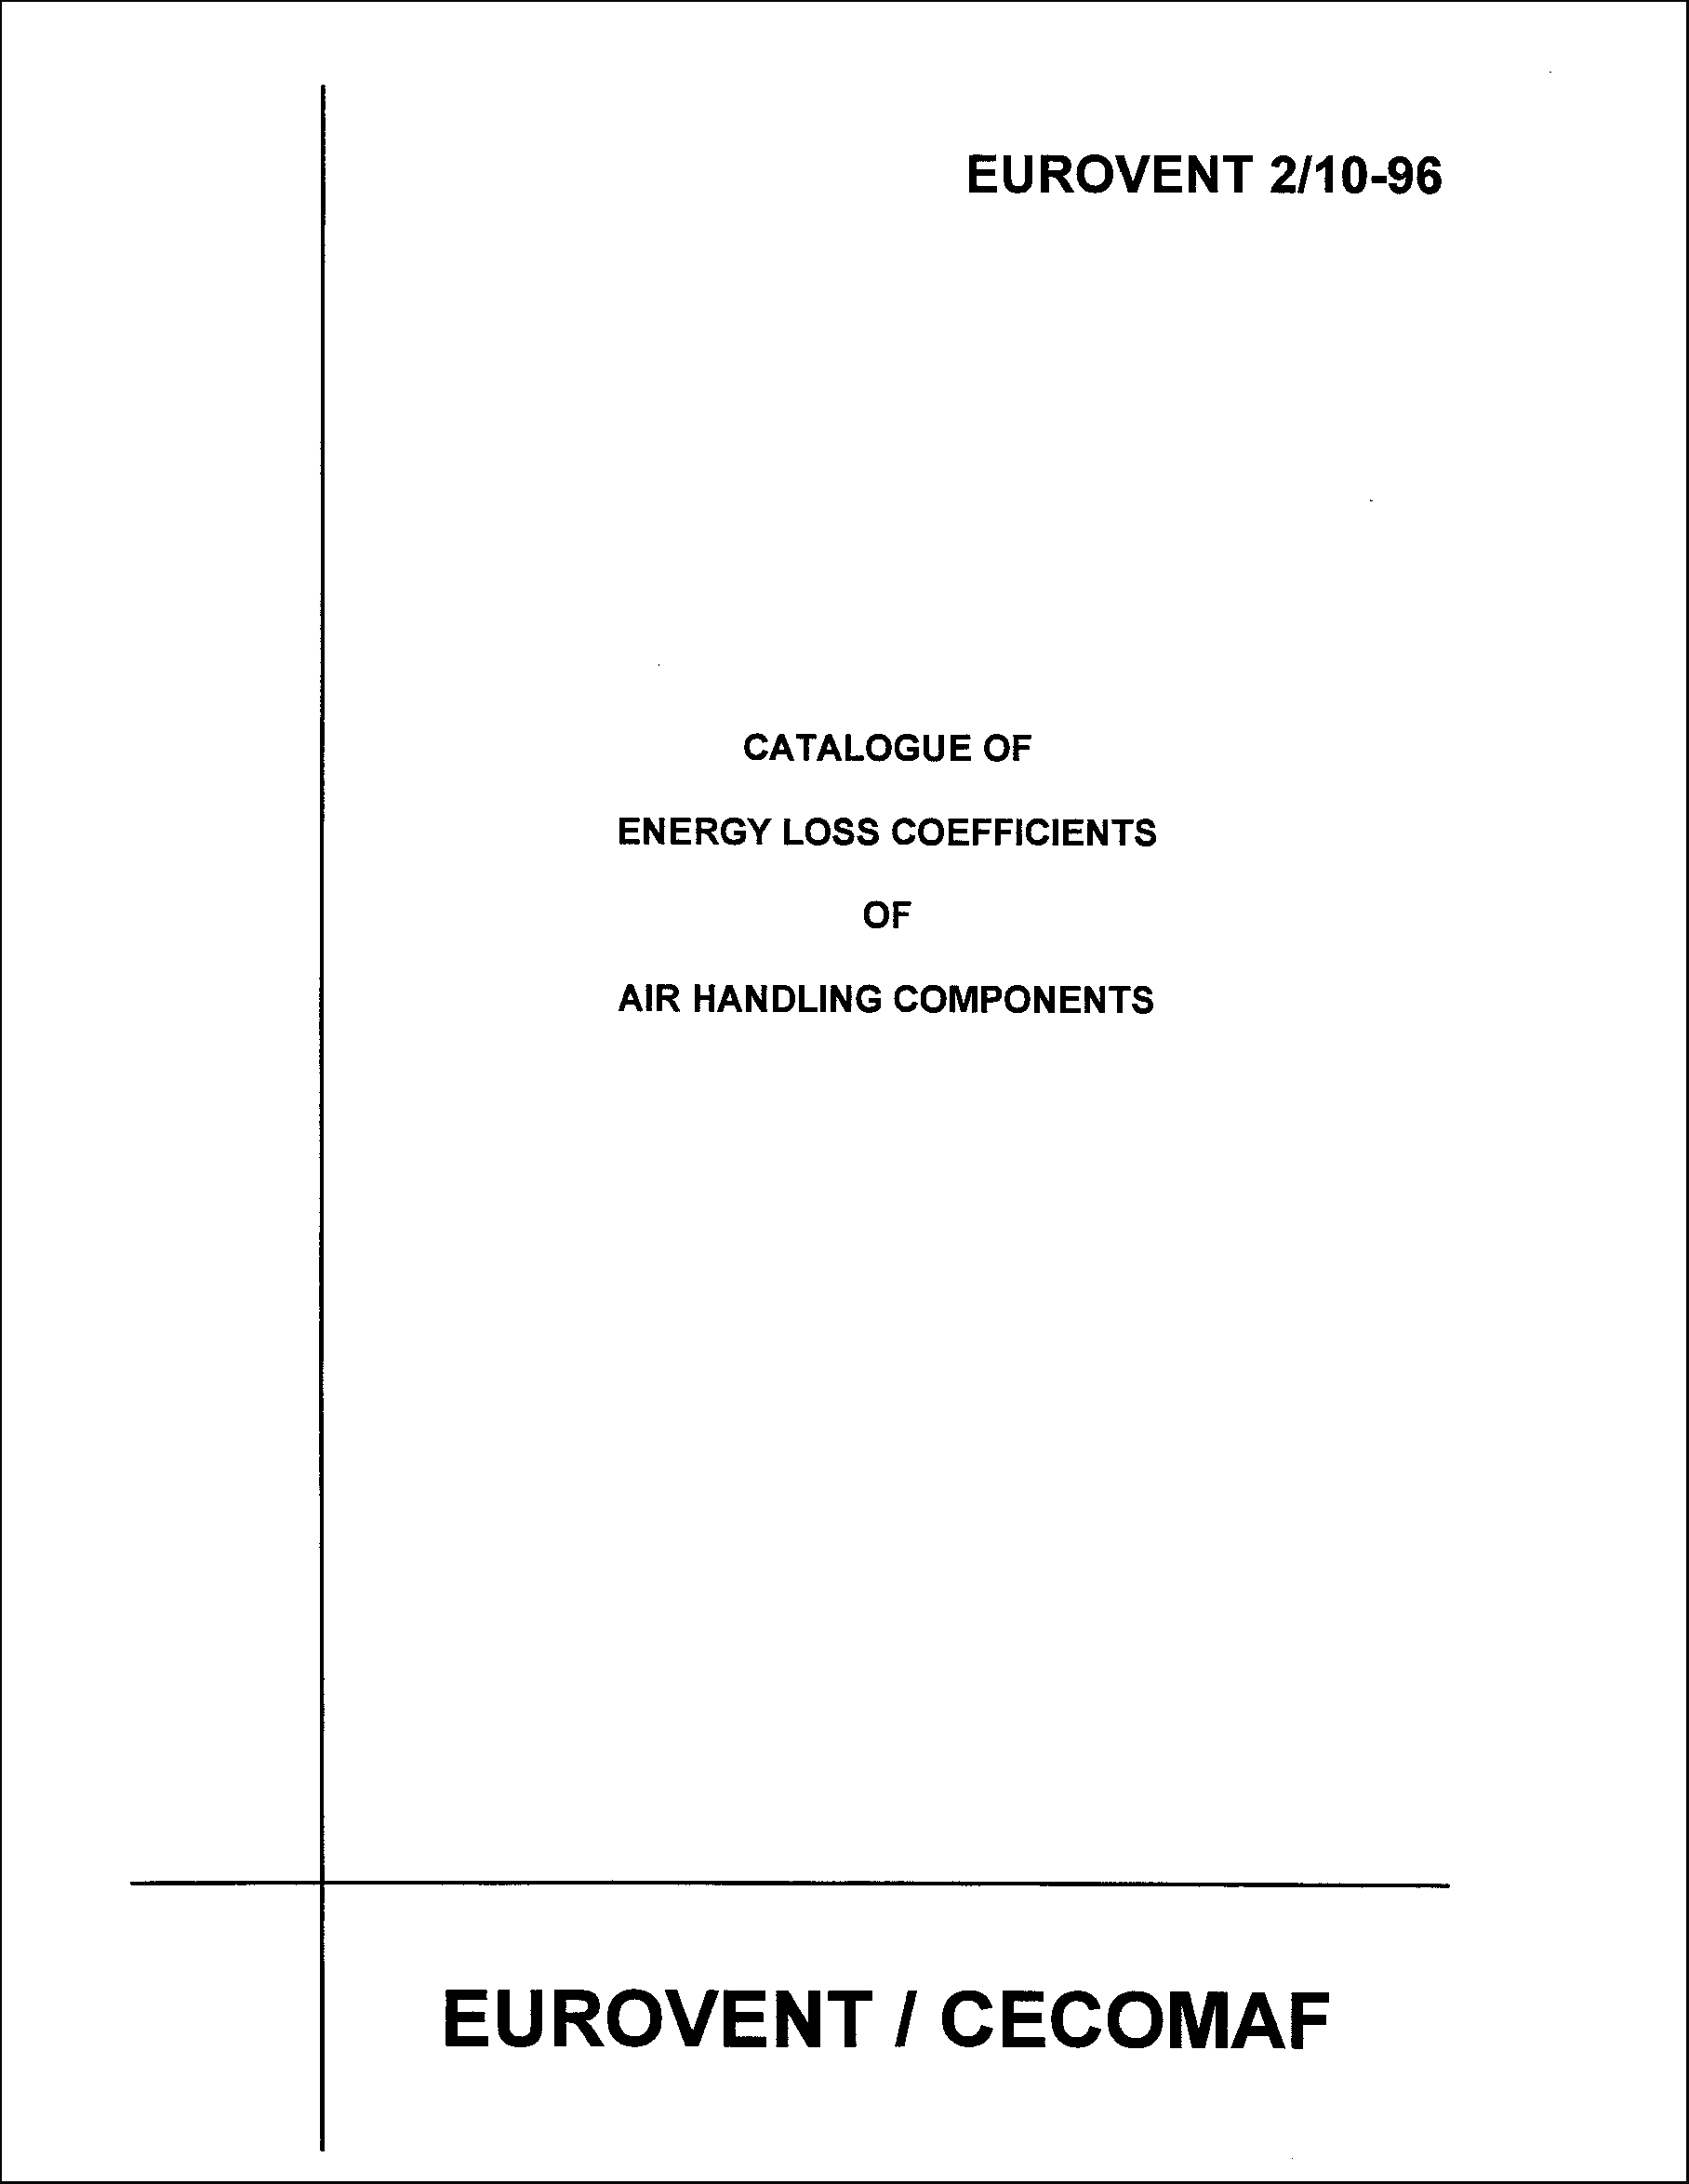 1996 - Catalogue of energy loss coefficients of air handling components